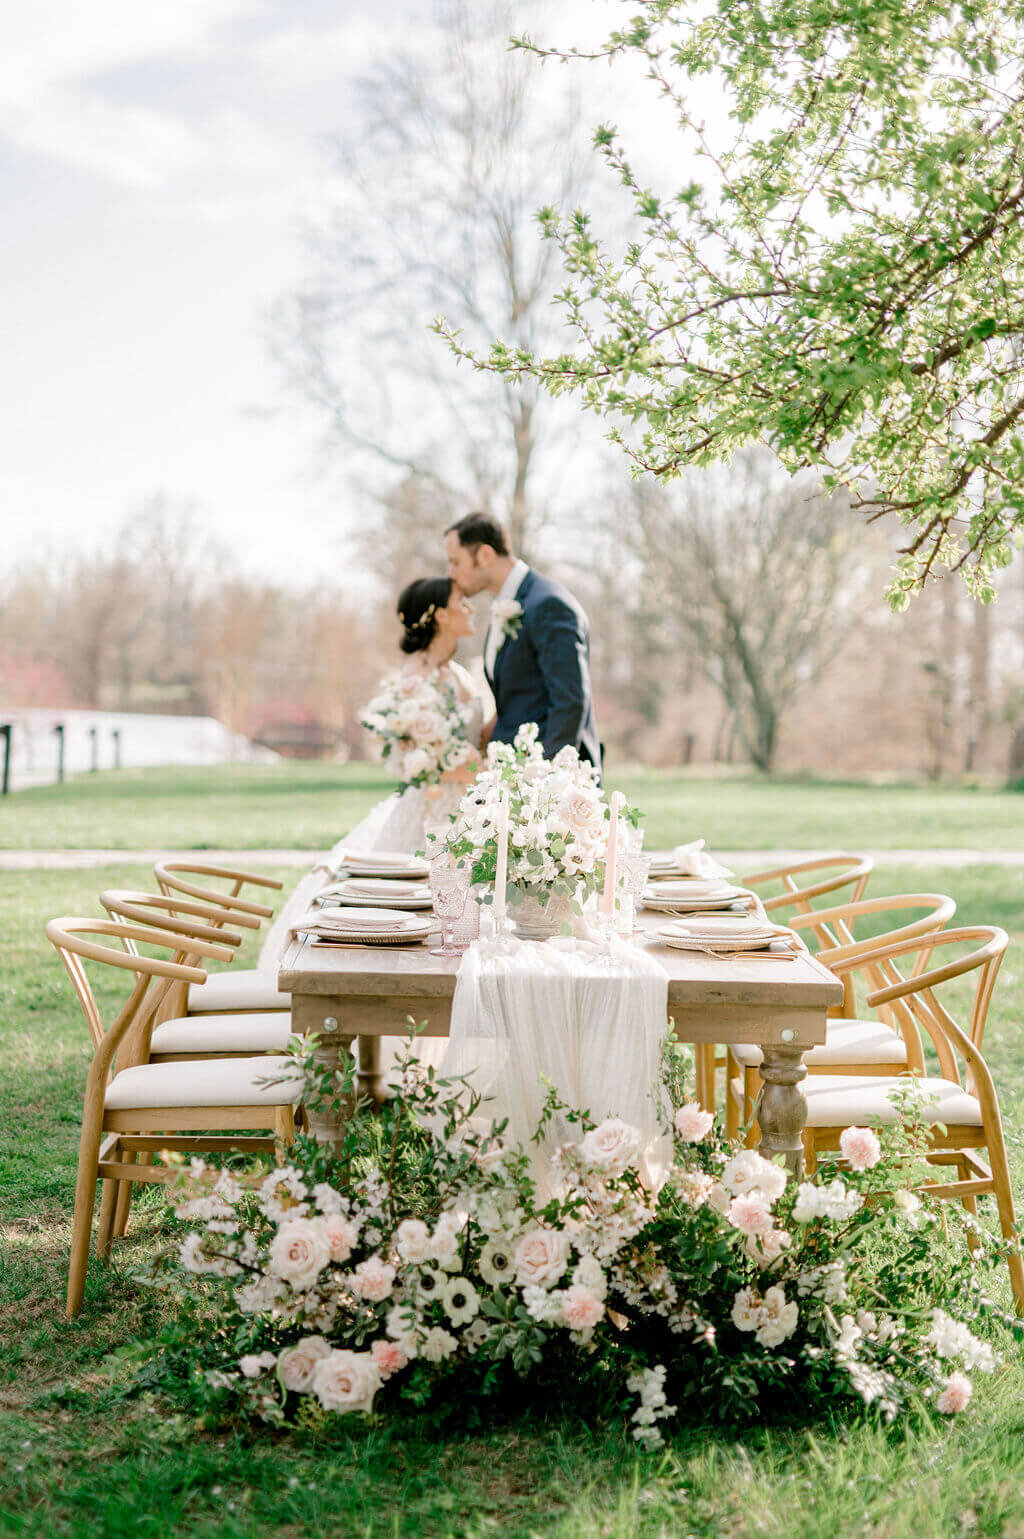 Couple kissing in front of table, wedding photos by Rachael Mattio Photography